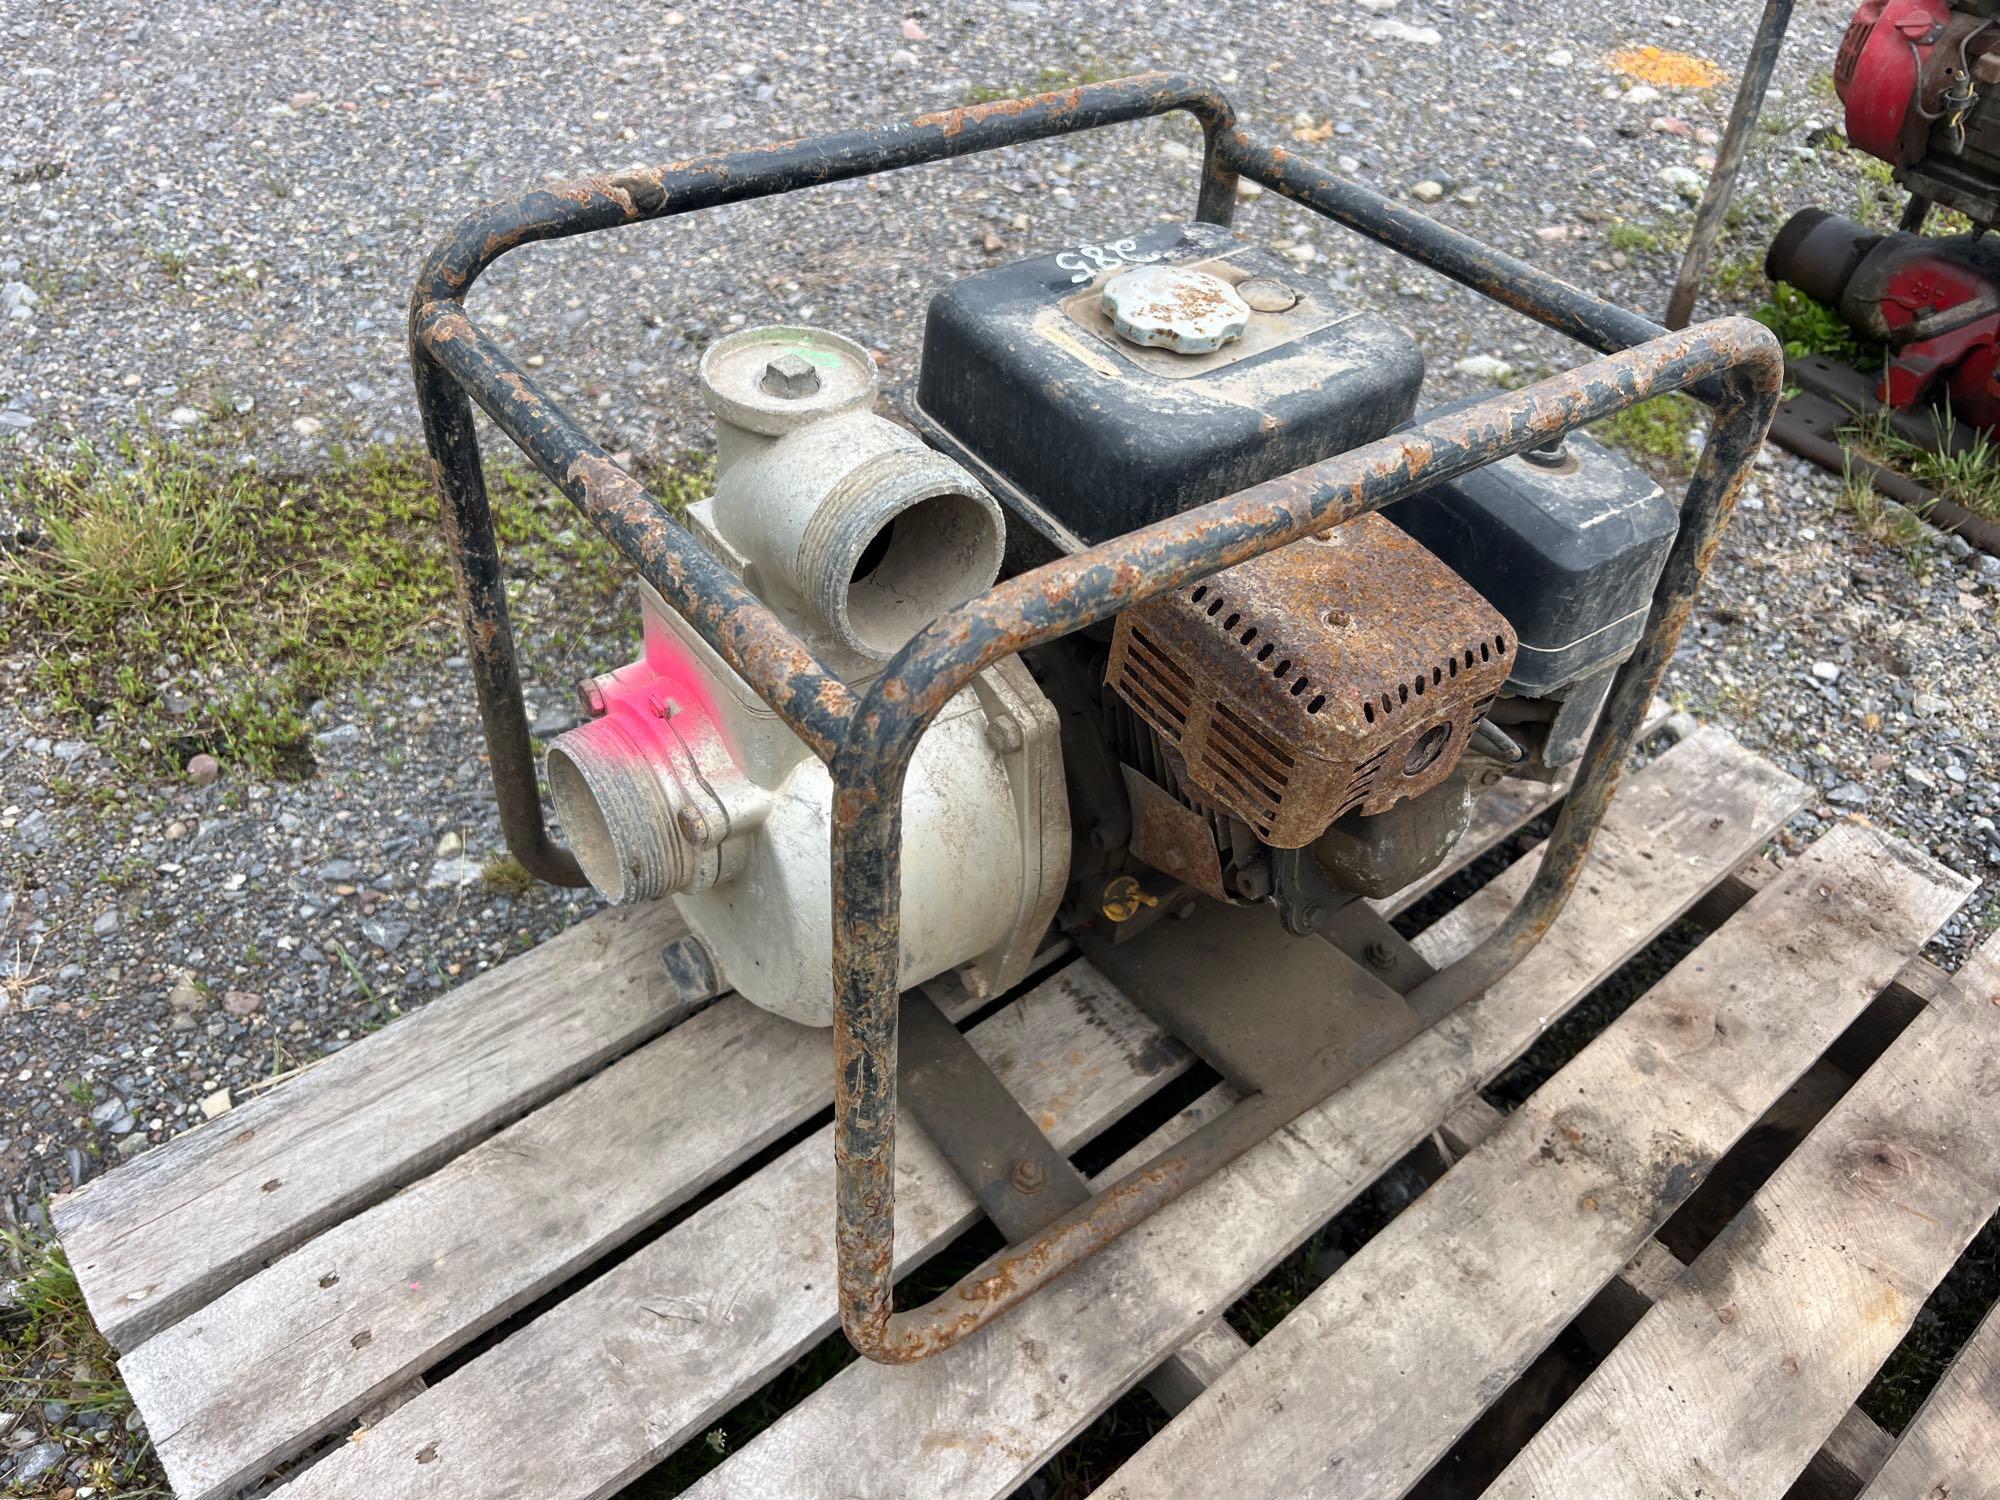 CHAMPION 3IN. TRASH PUMP WATER PUMP powered by gas engine.